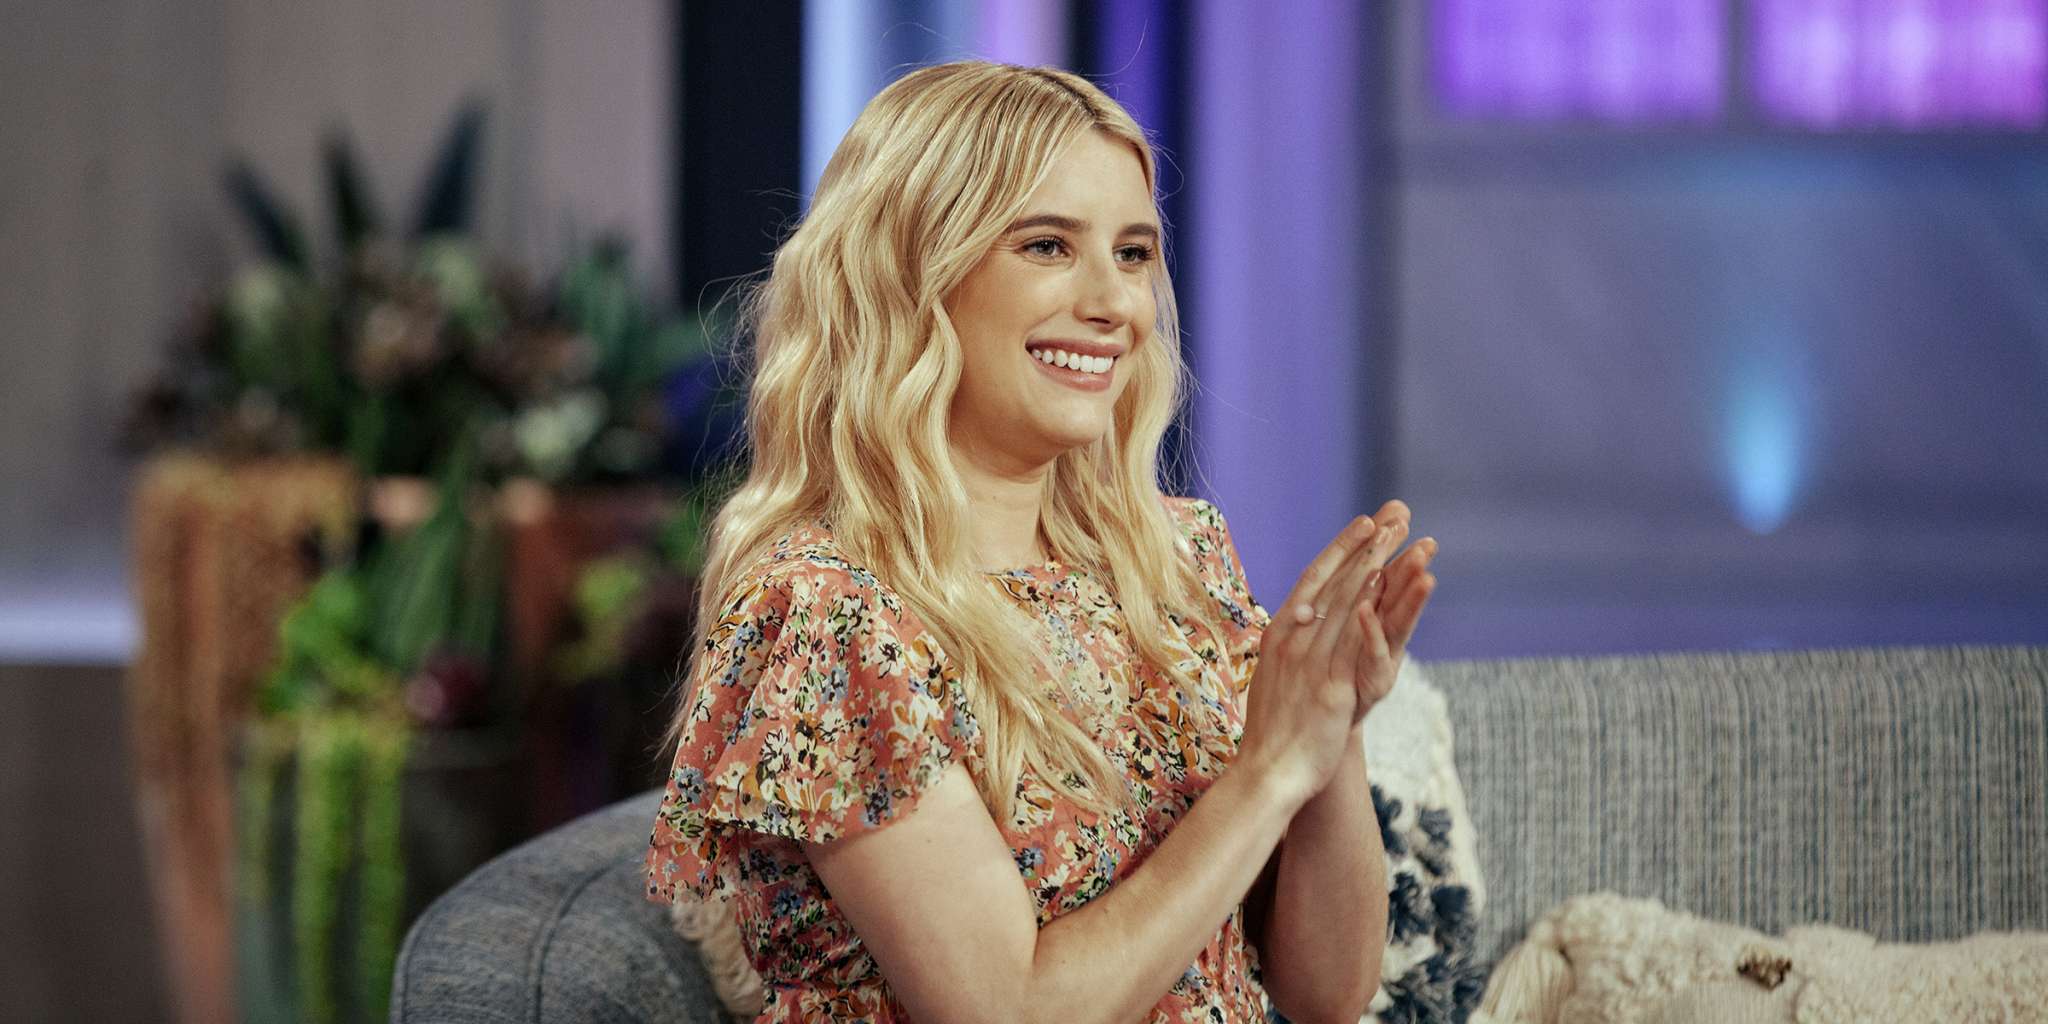 Set Photos Show Emma Roberts' Character Is Pregnant In Upcoming Sony Madame Web Film